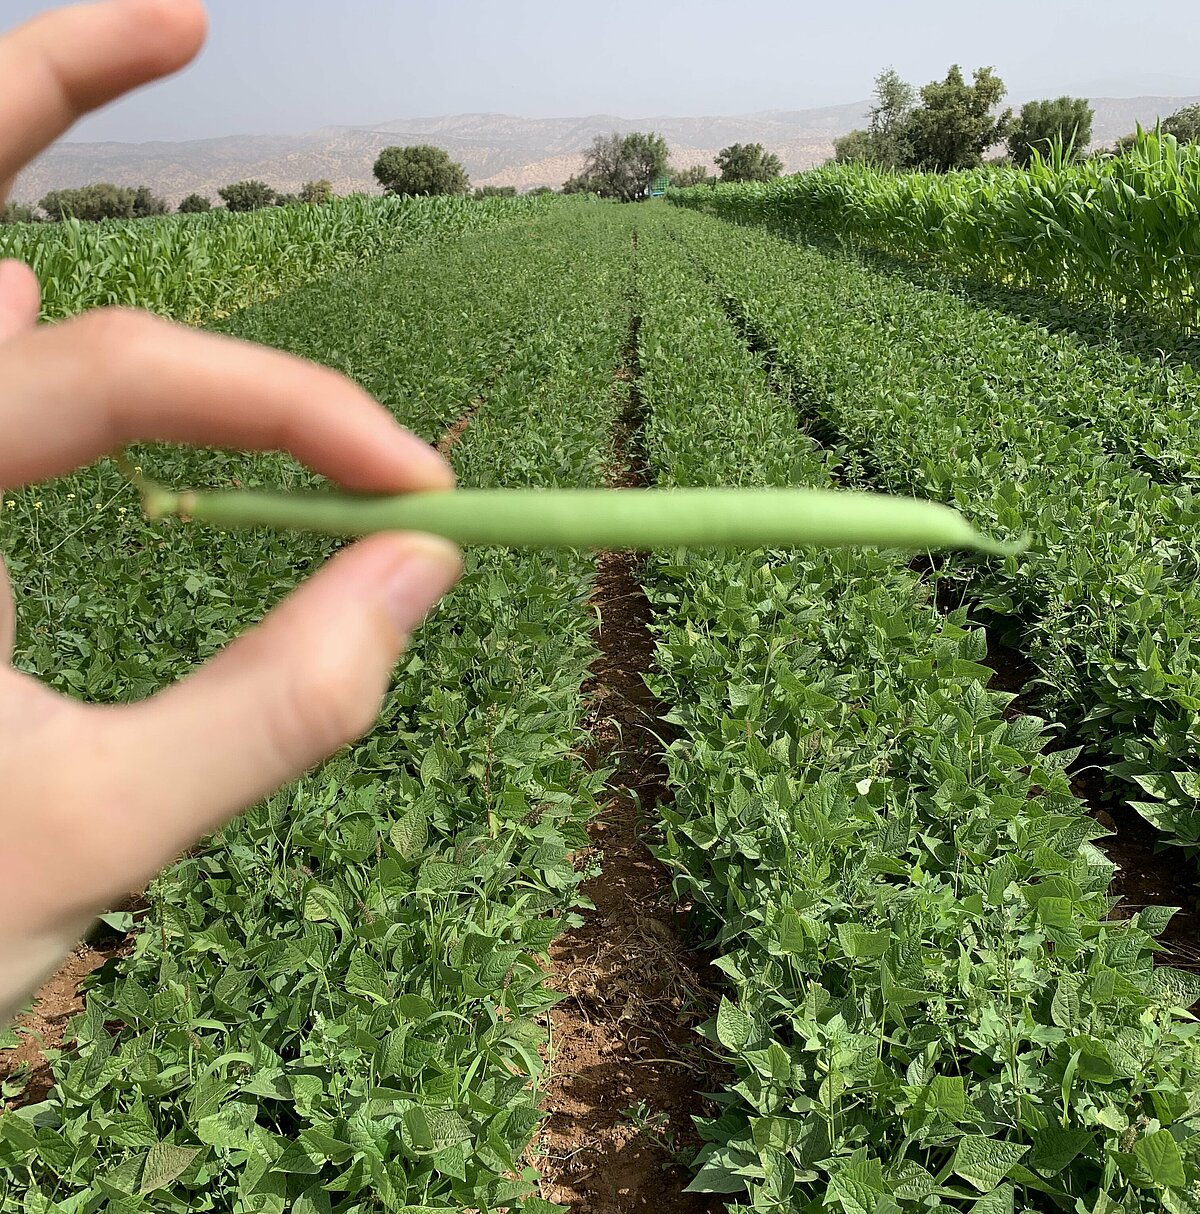 Sustainable vegetable production